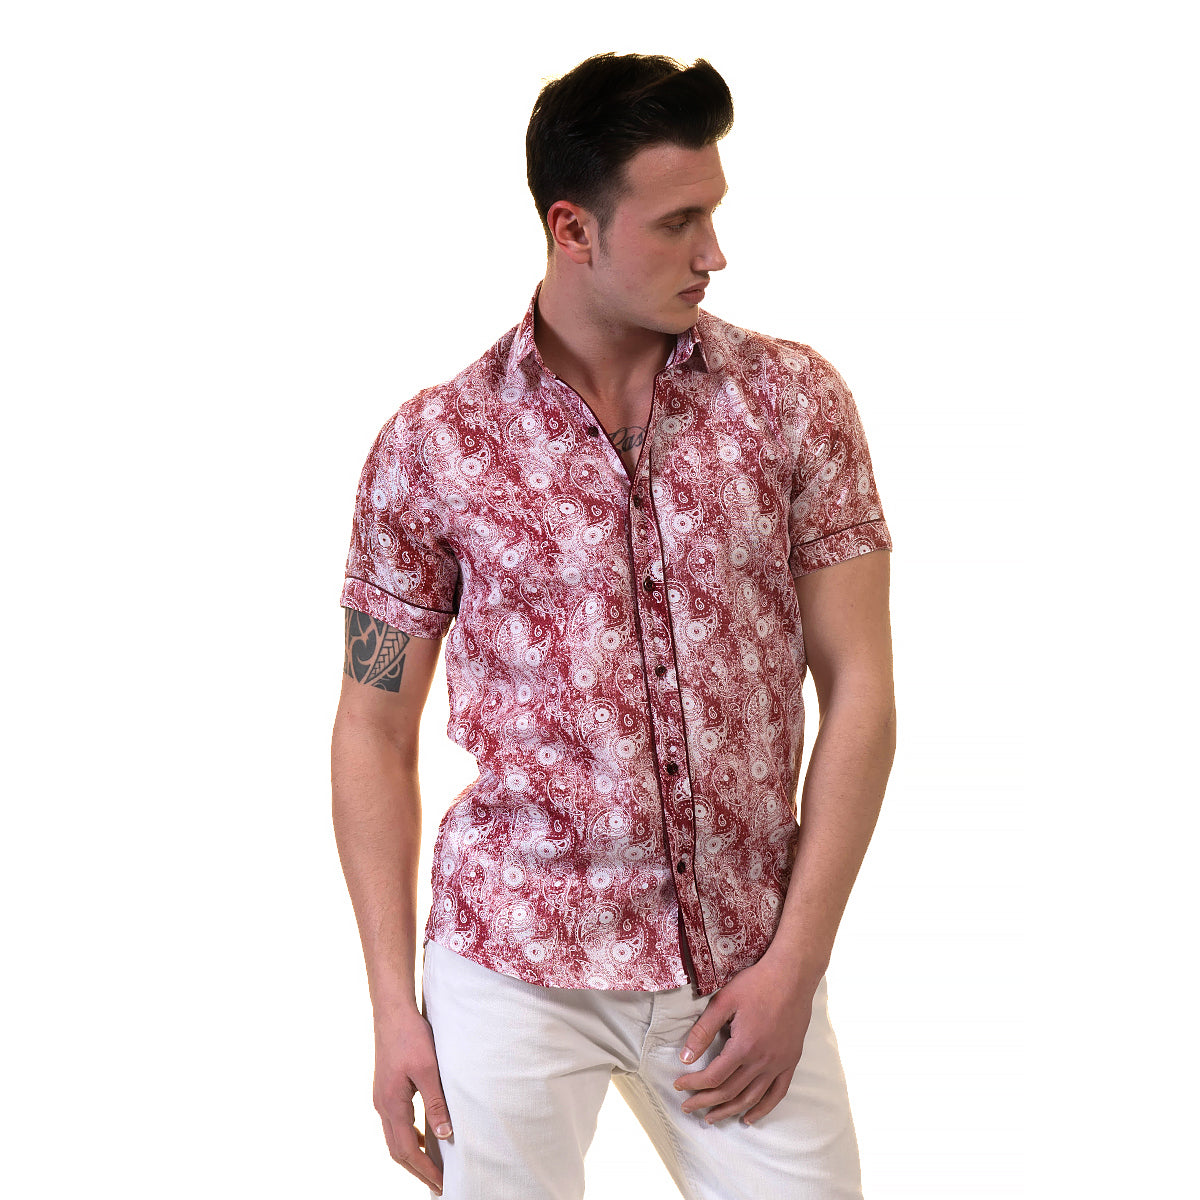 Pink Mens Short Sleeve Button up Shirts - Tailored Slim Fit Cotton Dress Shirts